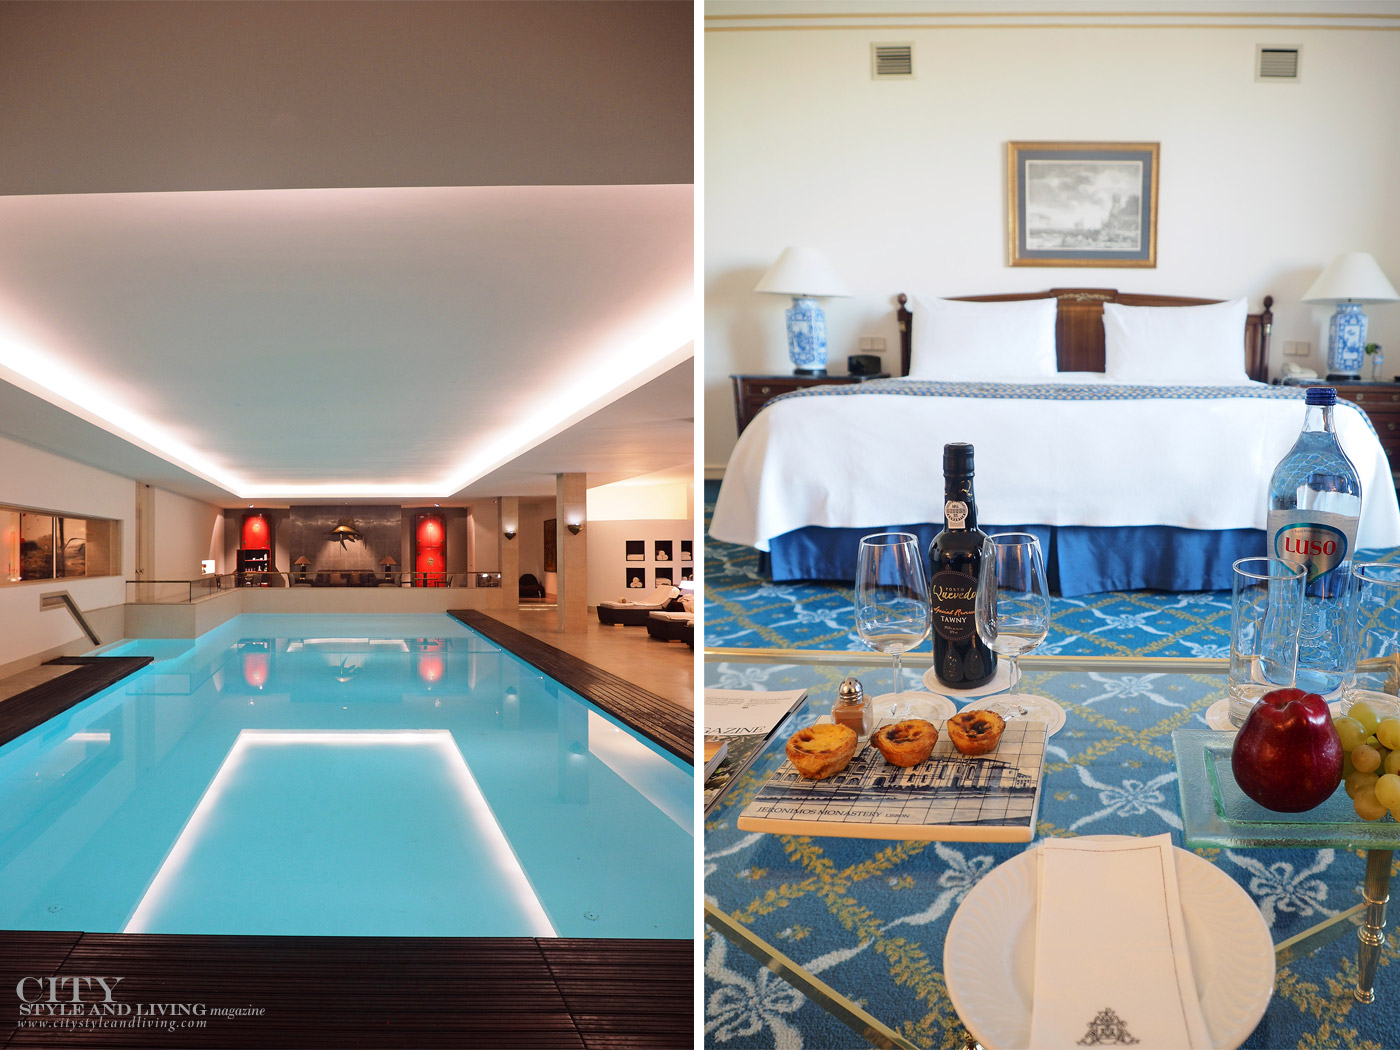 City Style and Living Magazine Travel Portugal Four Seasons Hotel Ritz Lisbon Pool and inside room